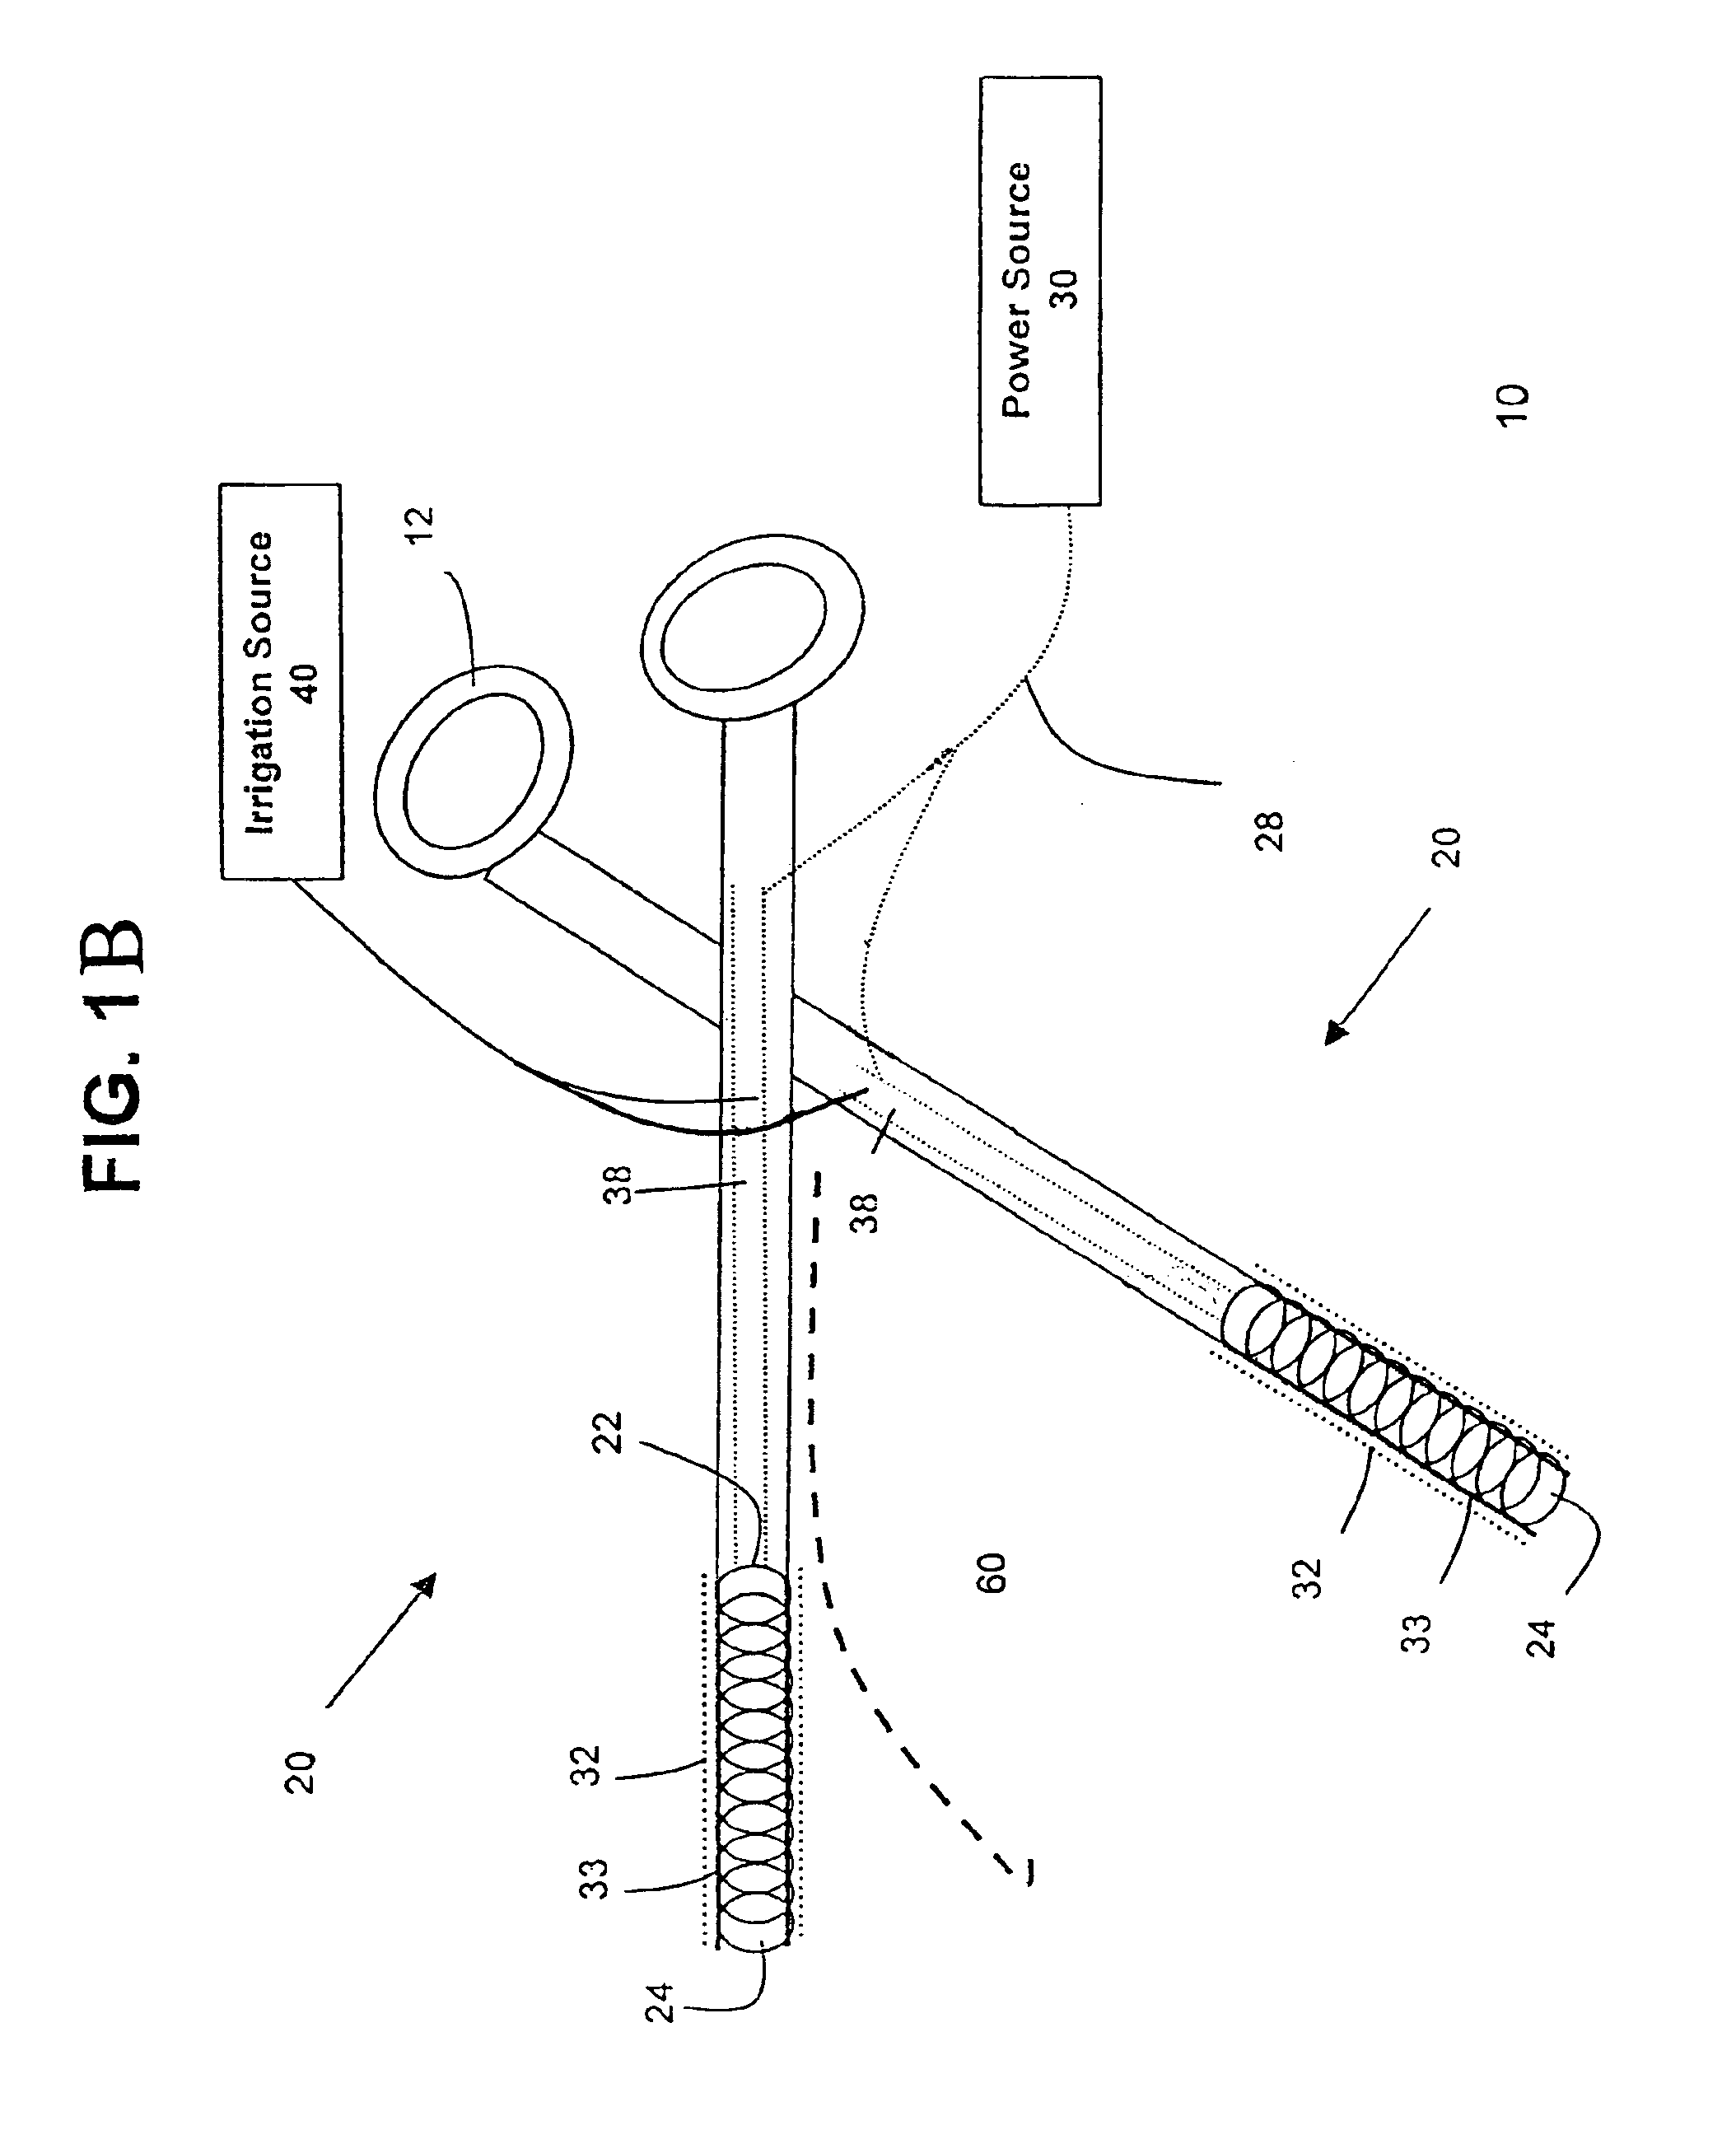 Variable length electrodes for delivery of irrigated ablation